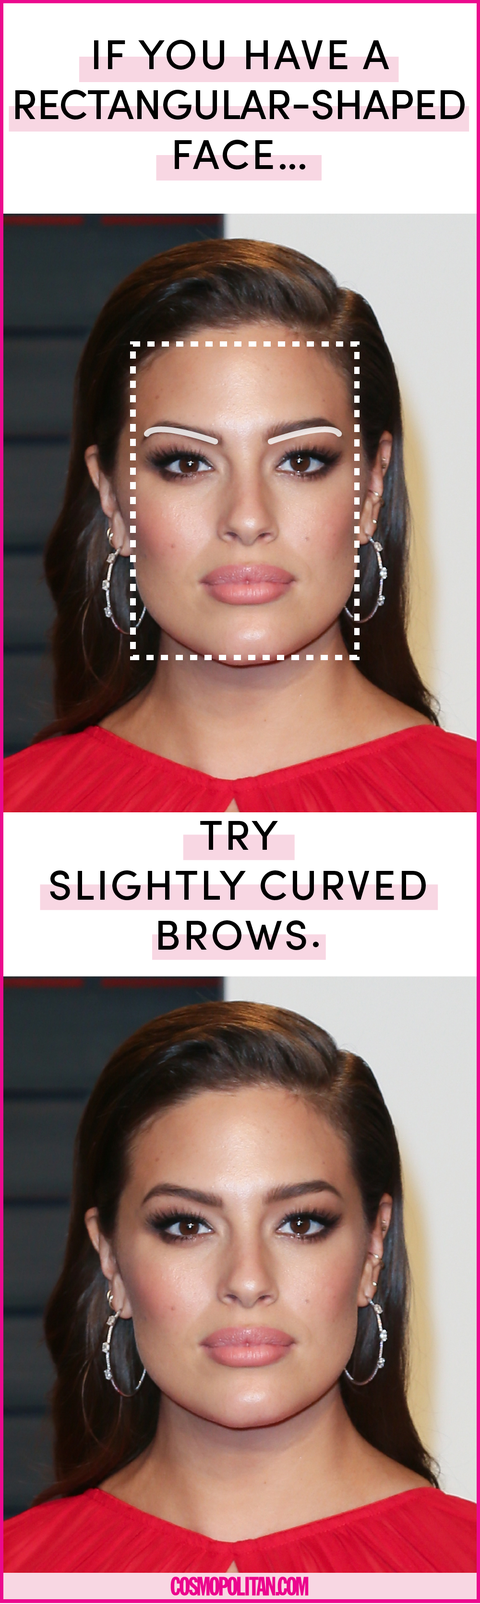 Different Eyebrow Shapes For Your Face How To Shape Your Brows For Round Oval And Heart Shaped Faces